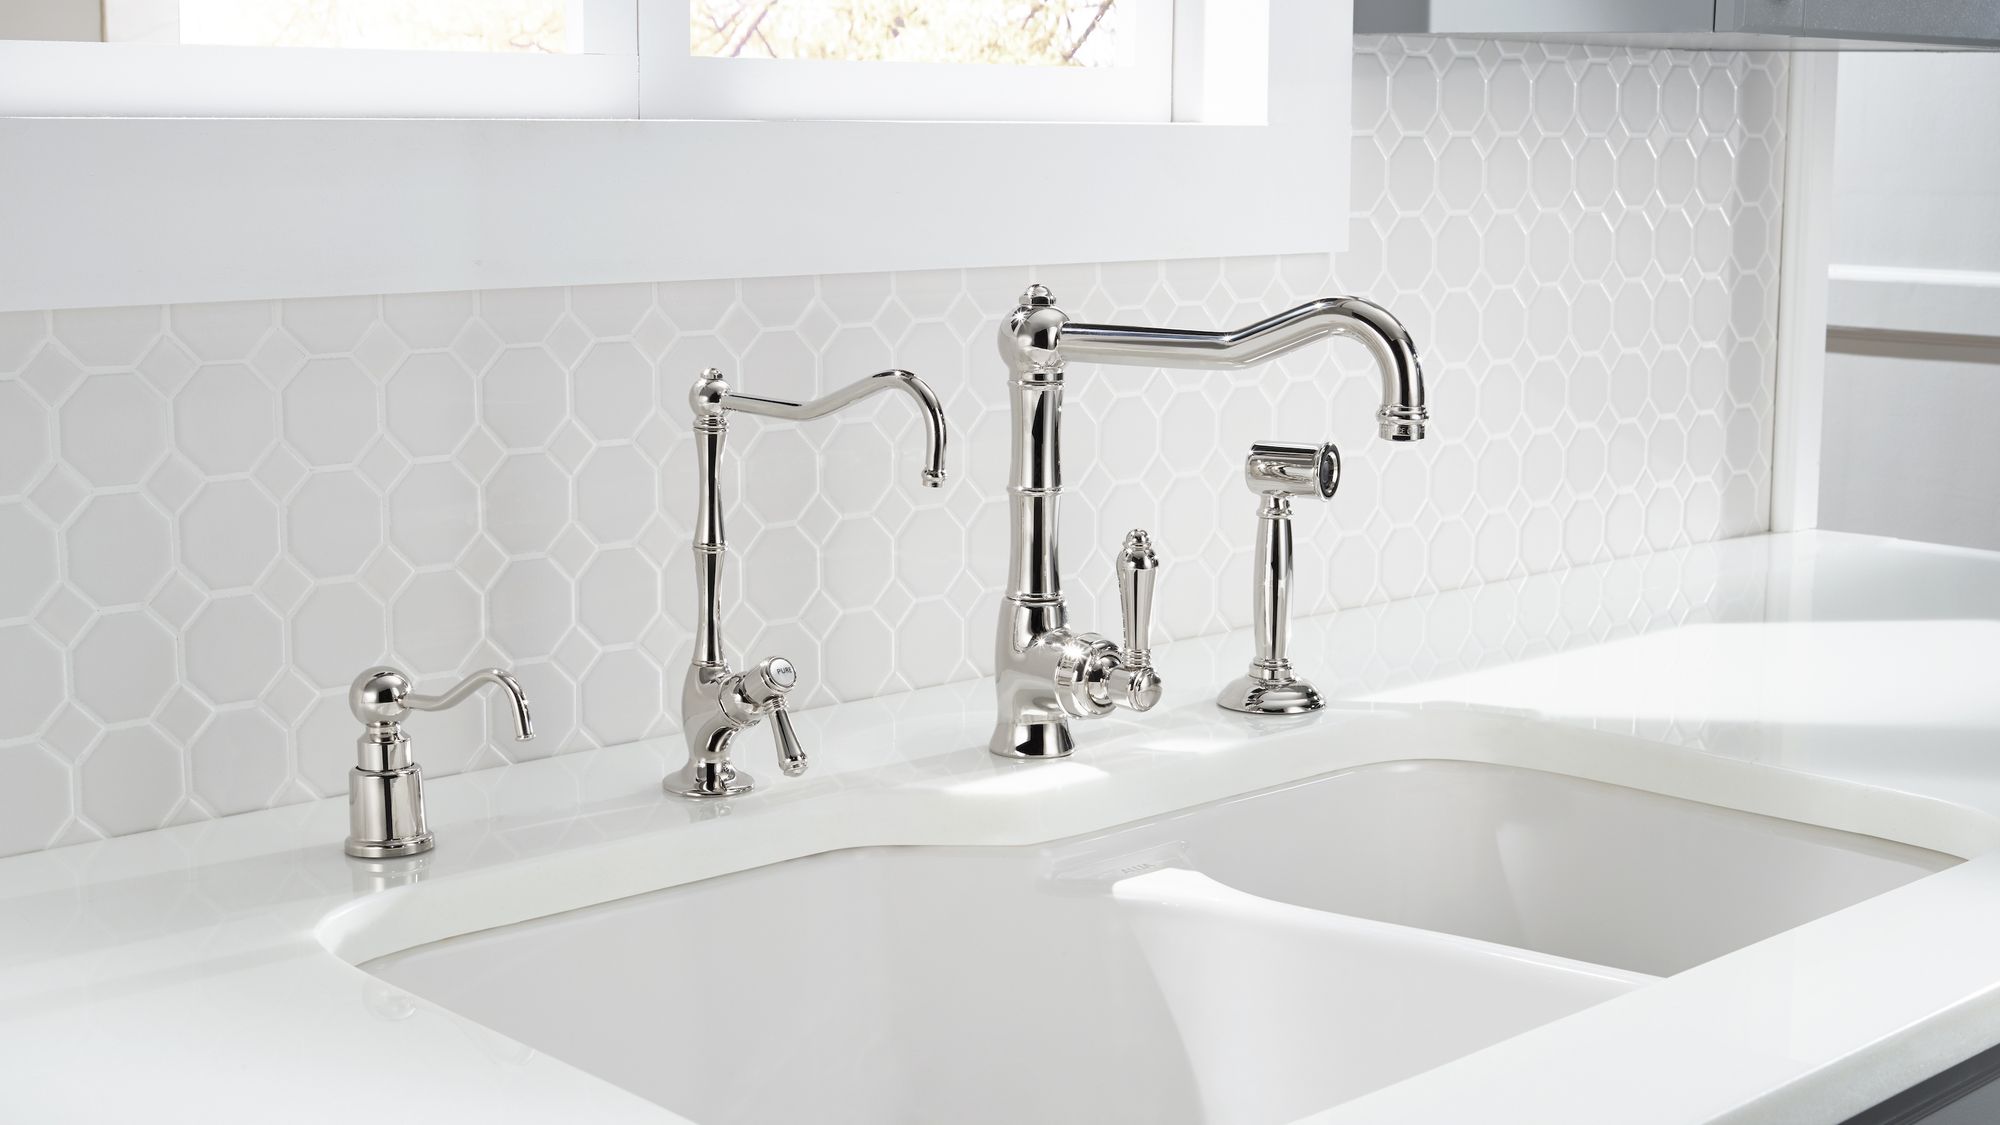 ROHL Allia Sink Collections are crafted from the special heavy ball clay found in the region.